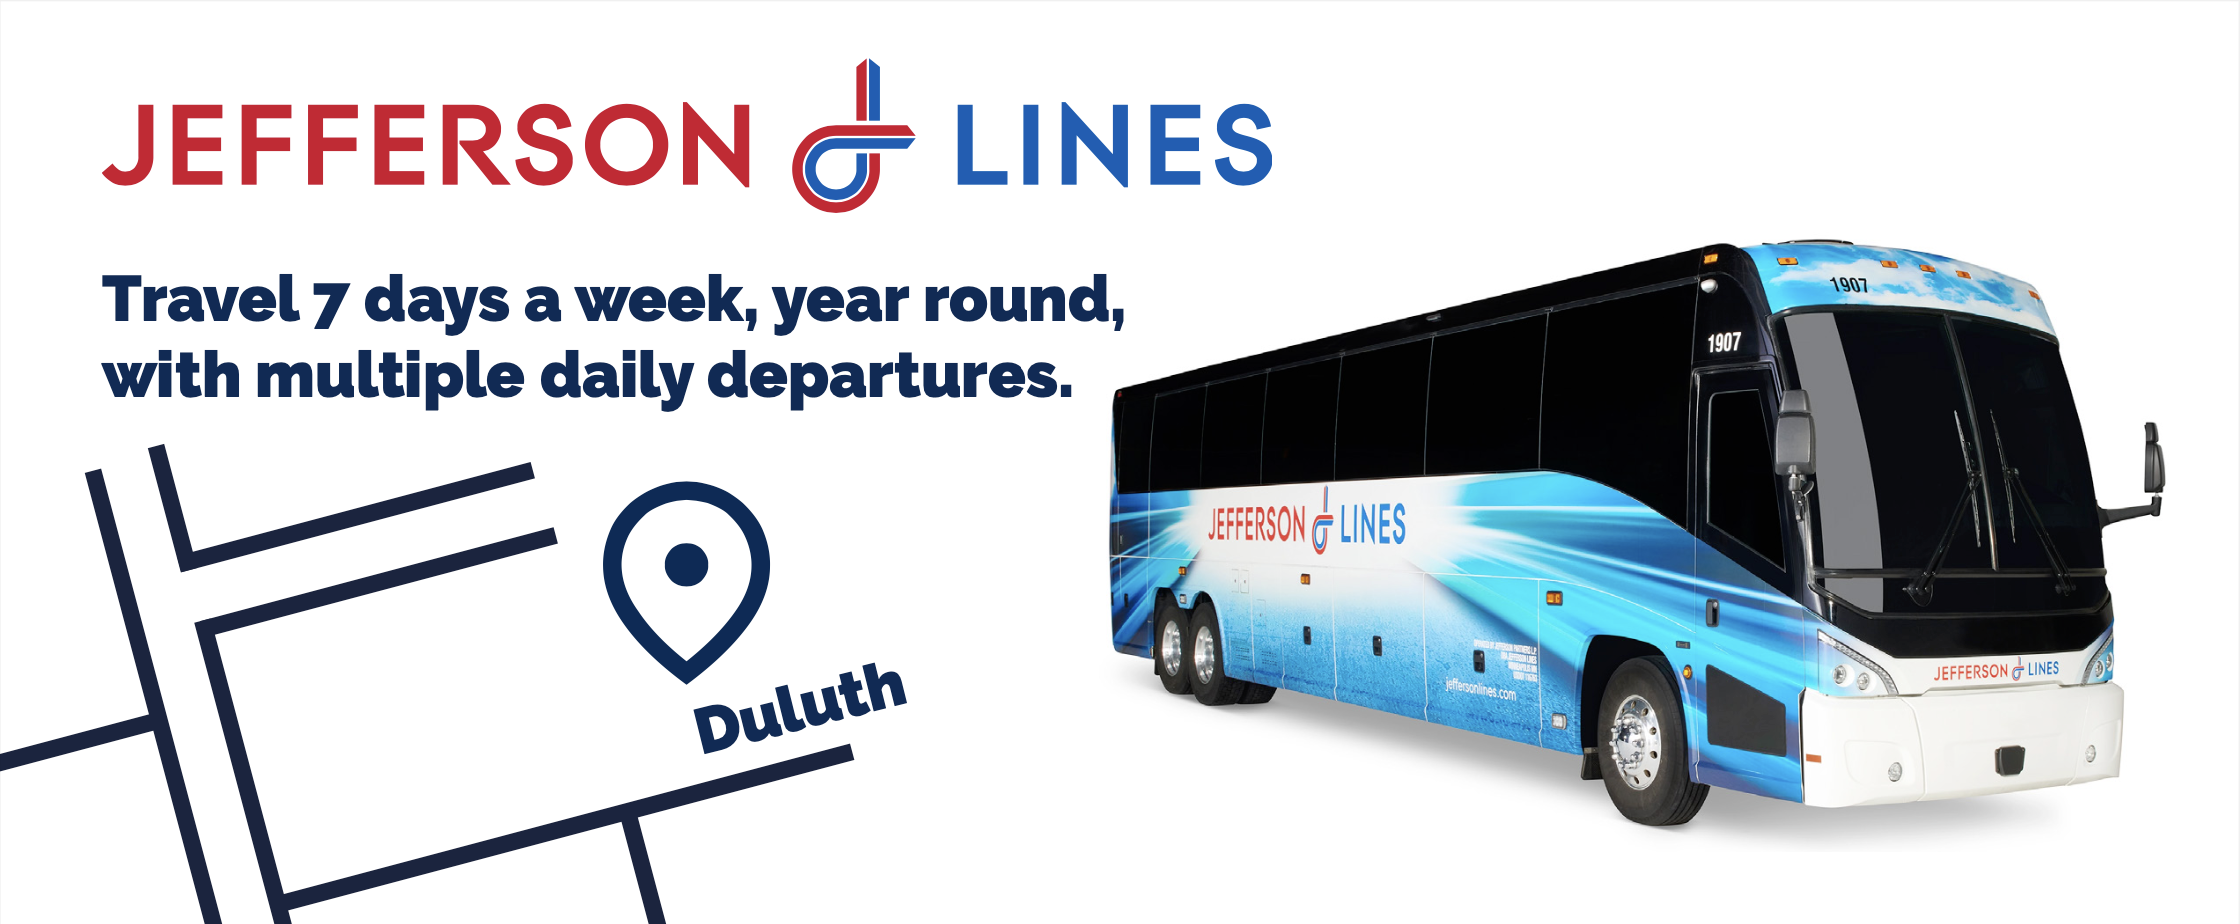 Jefferson Lines. Travel 7 days a week, year round, with multiple daily departures.